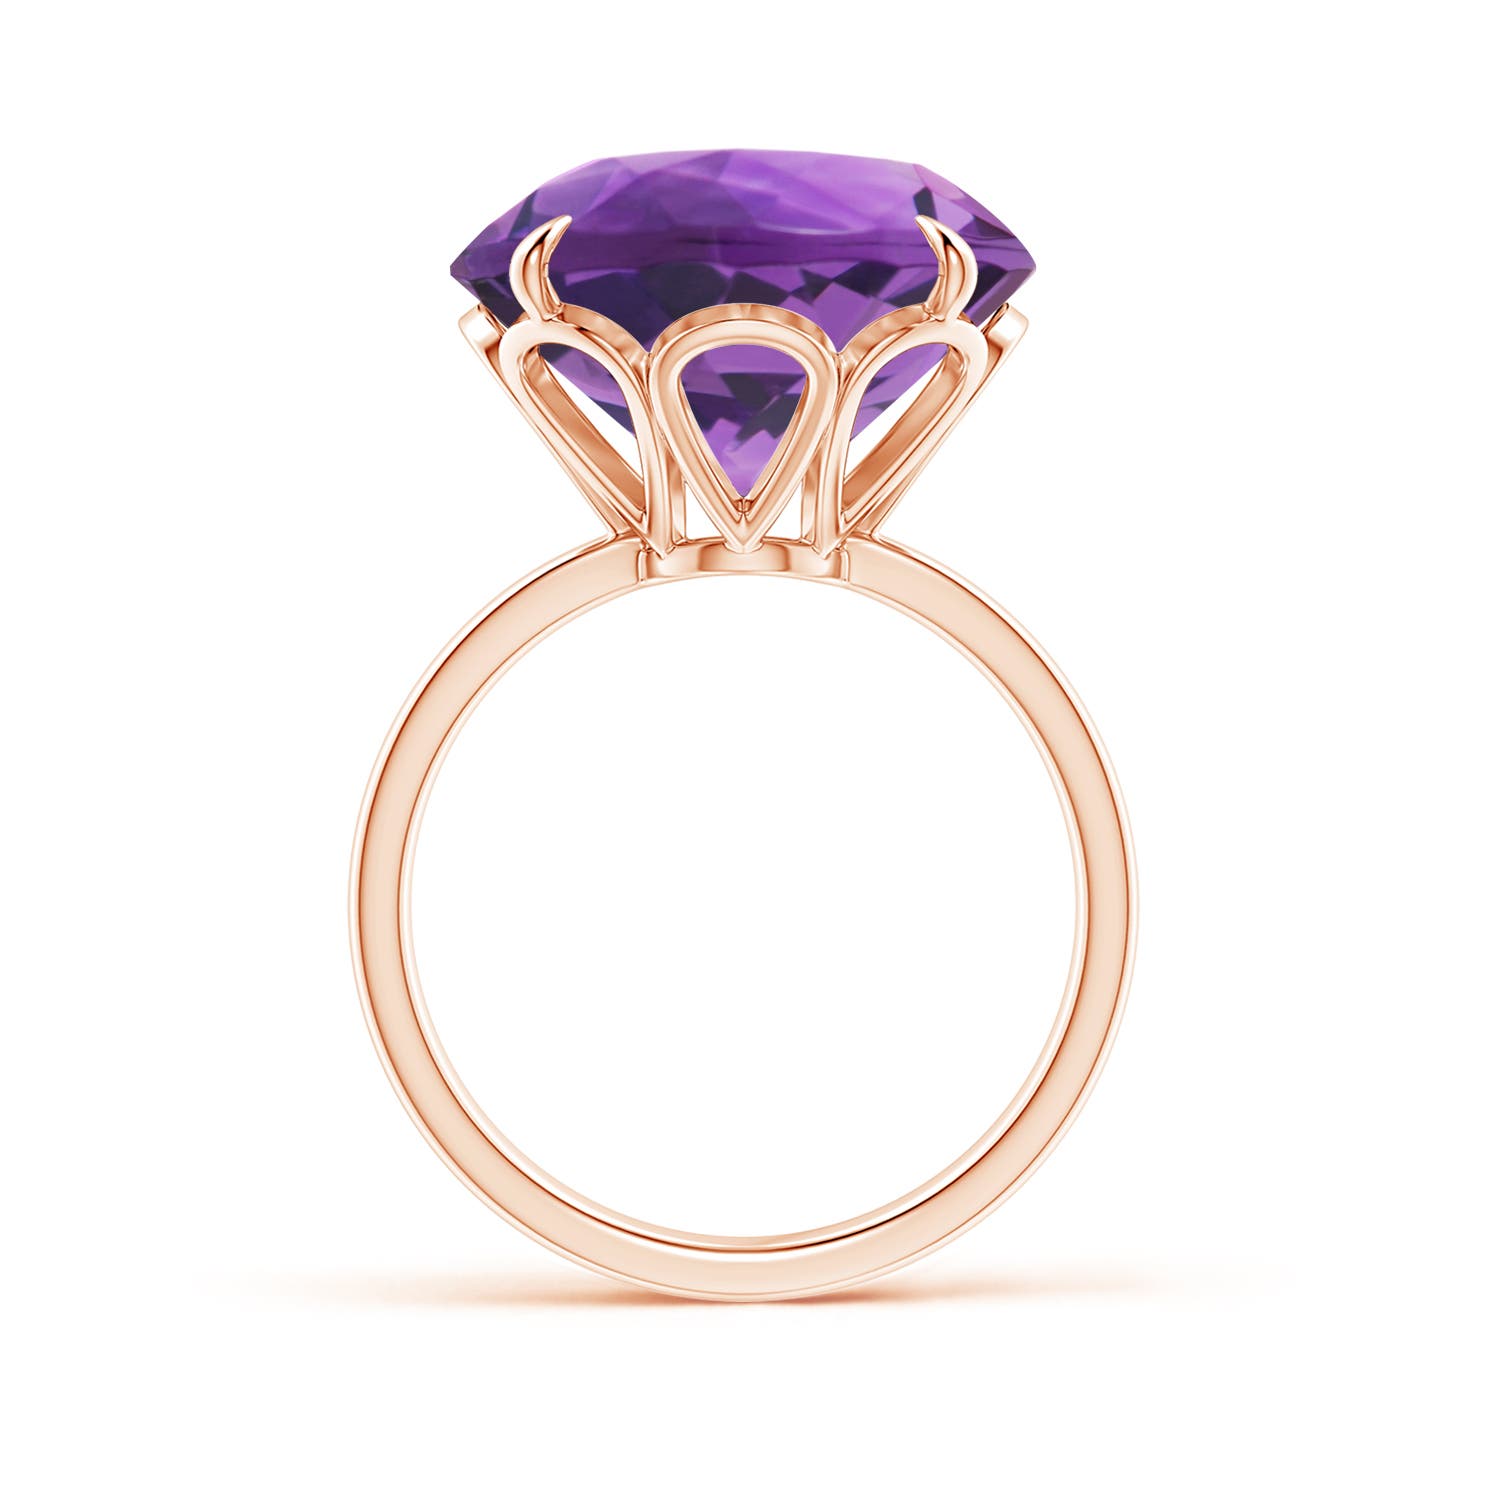 AAA - Amethyst / 11 CT / 14 KT Rose Gold